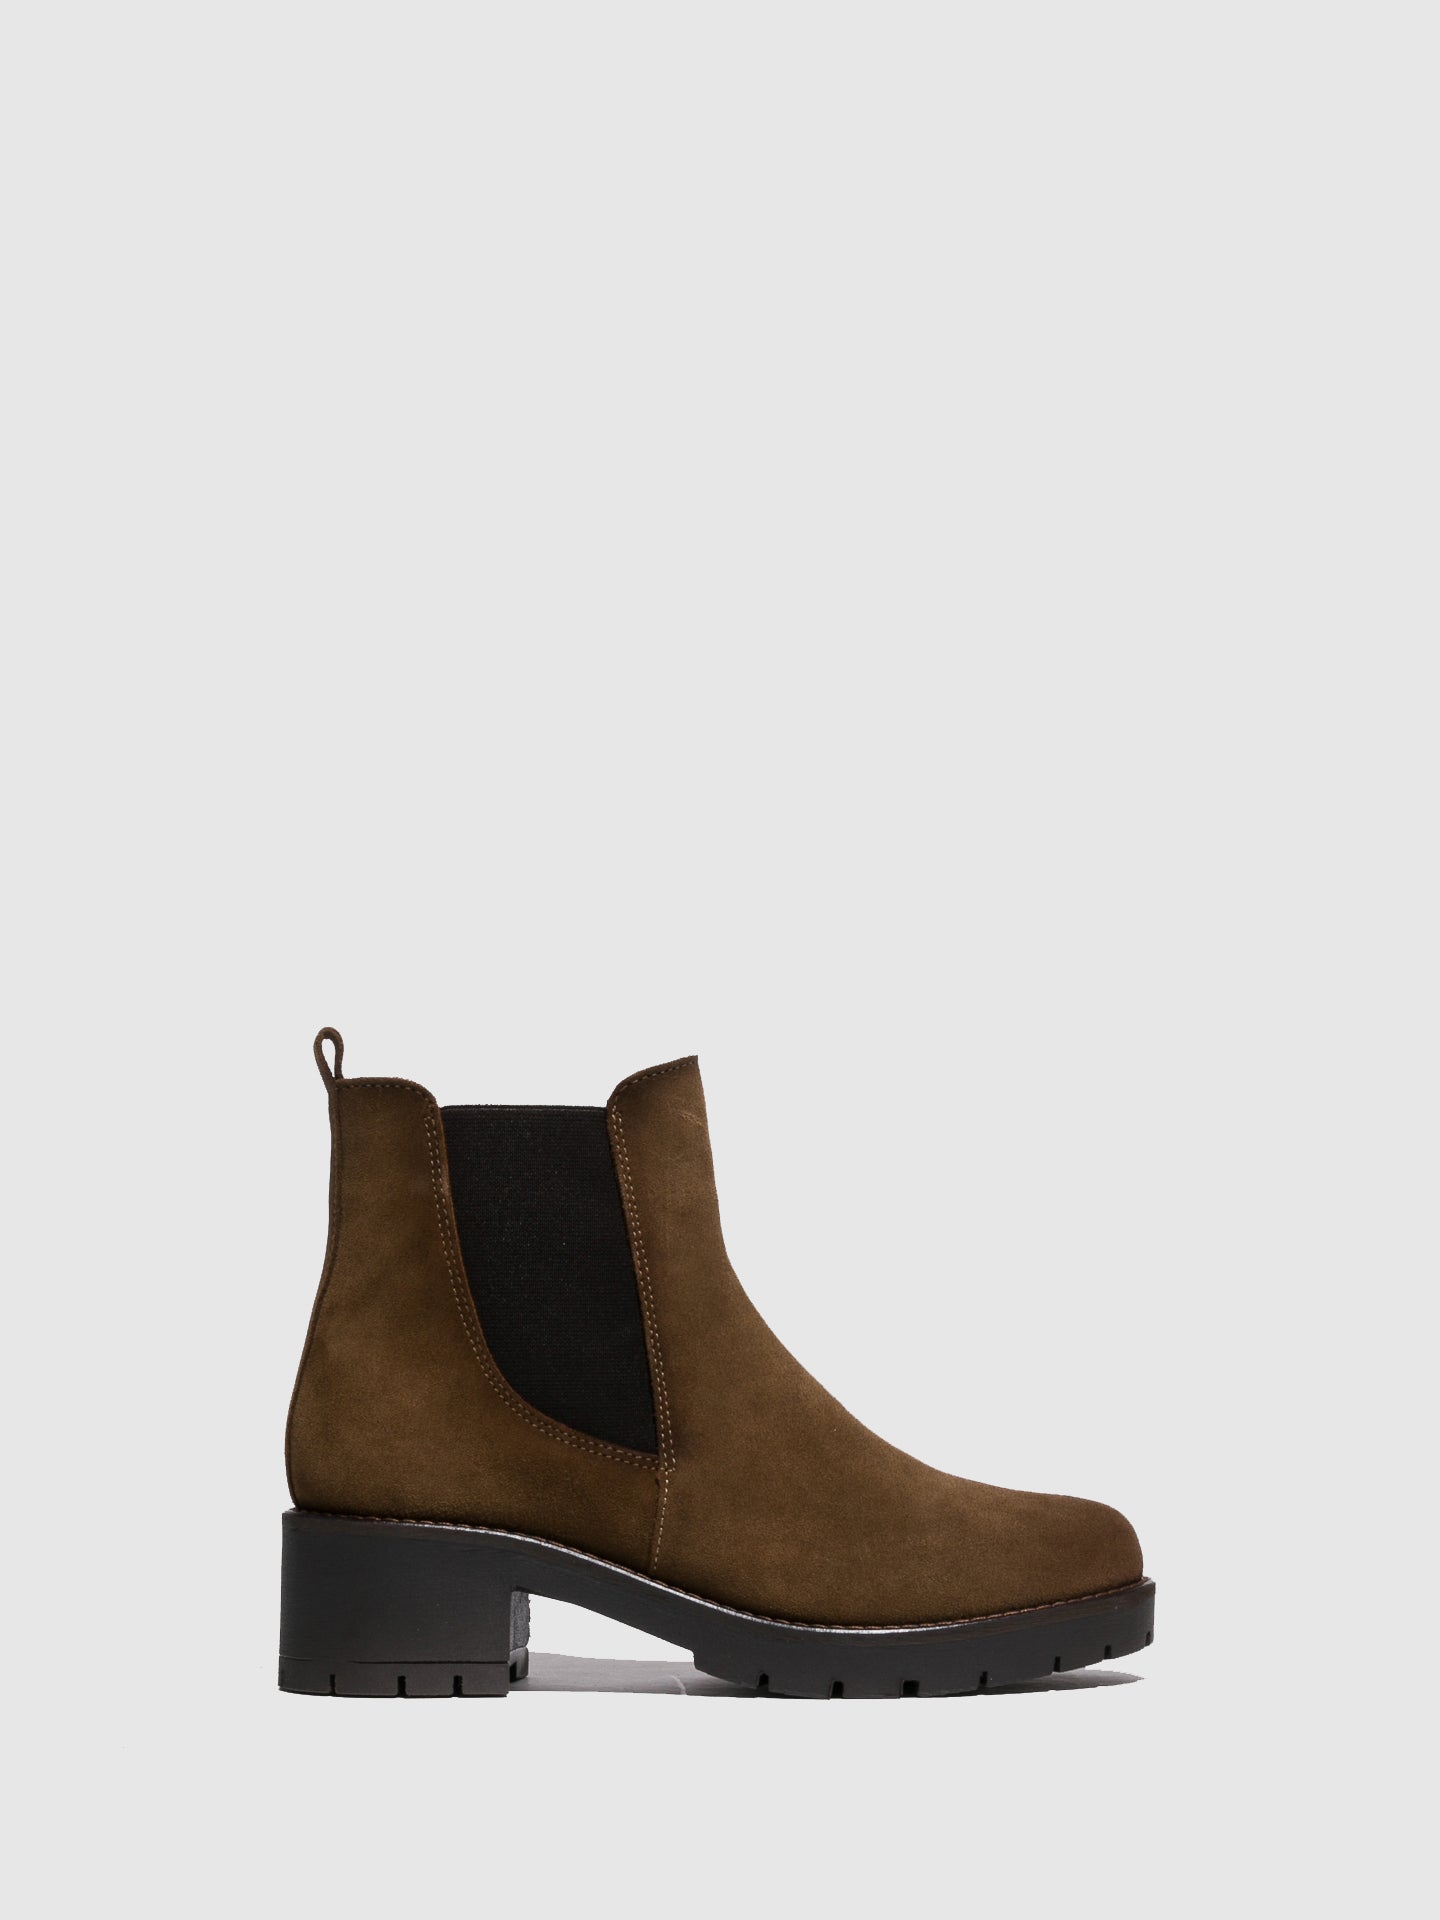 Foreva Tan Chelsea Ankle Boots